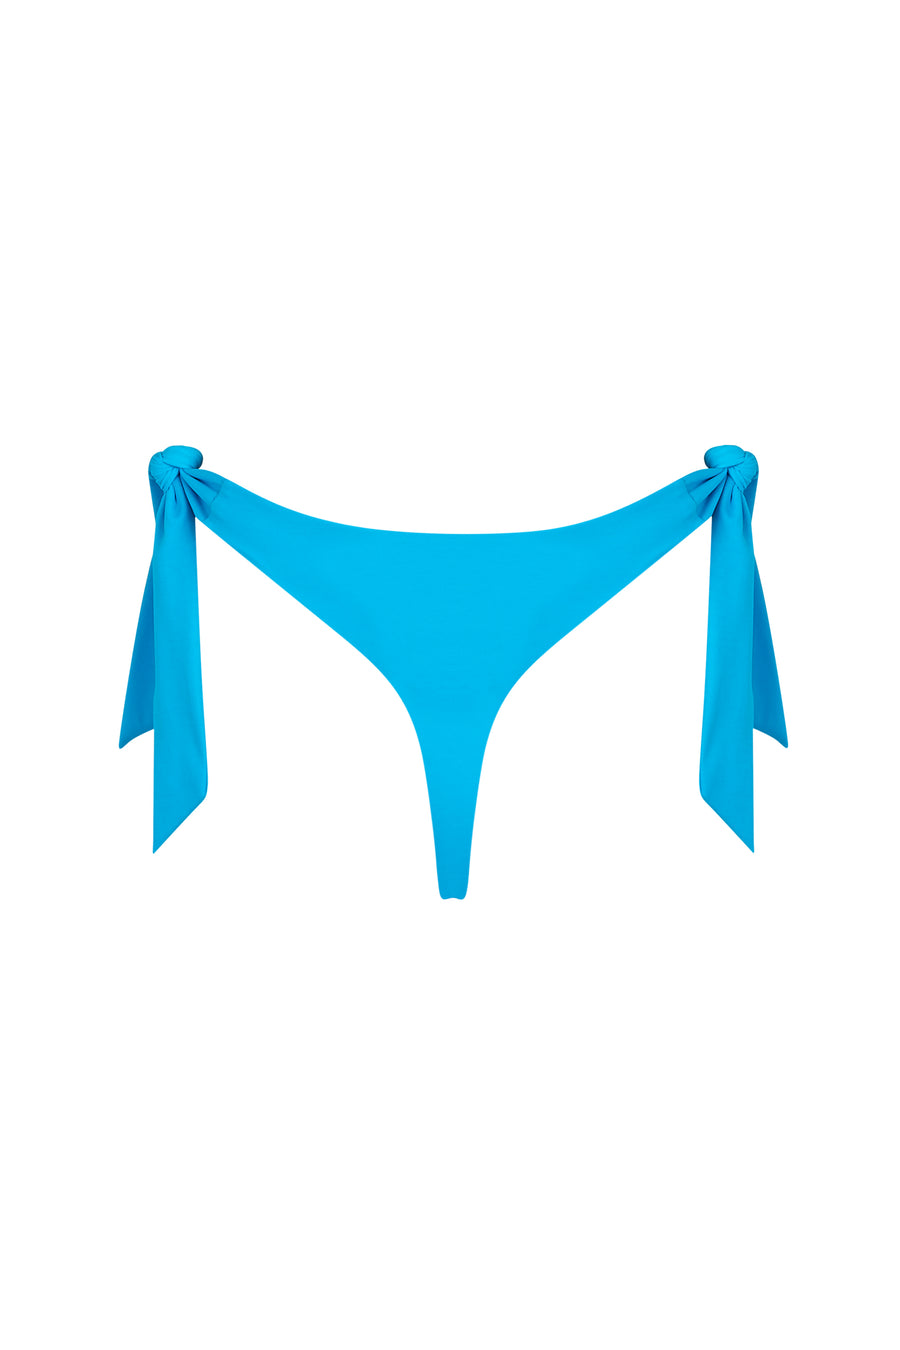 Feminine, self empowerment and confidence in this recycled bottom bikini. Color is enhancer of skin tone